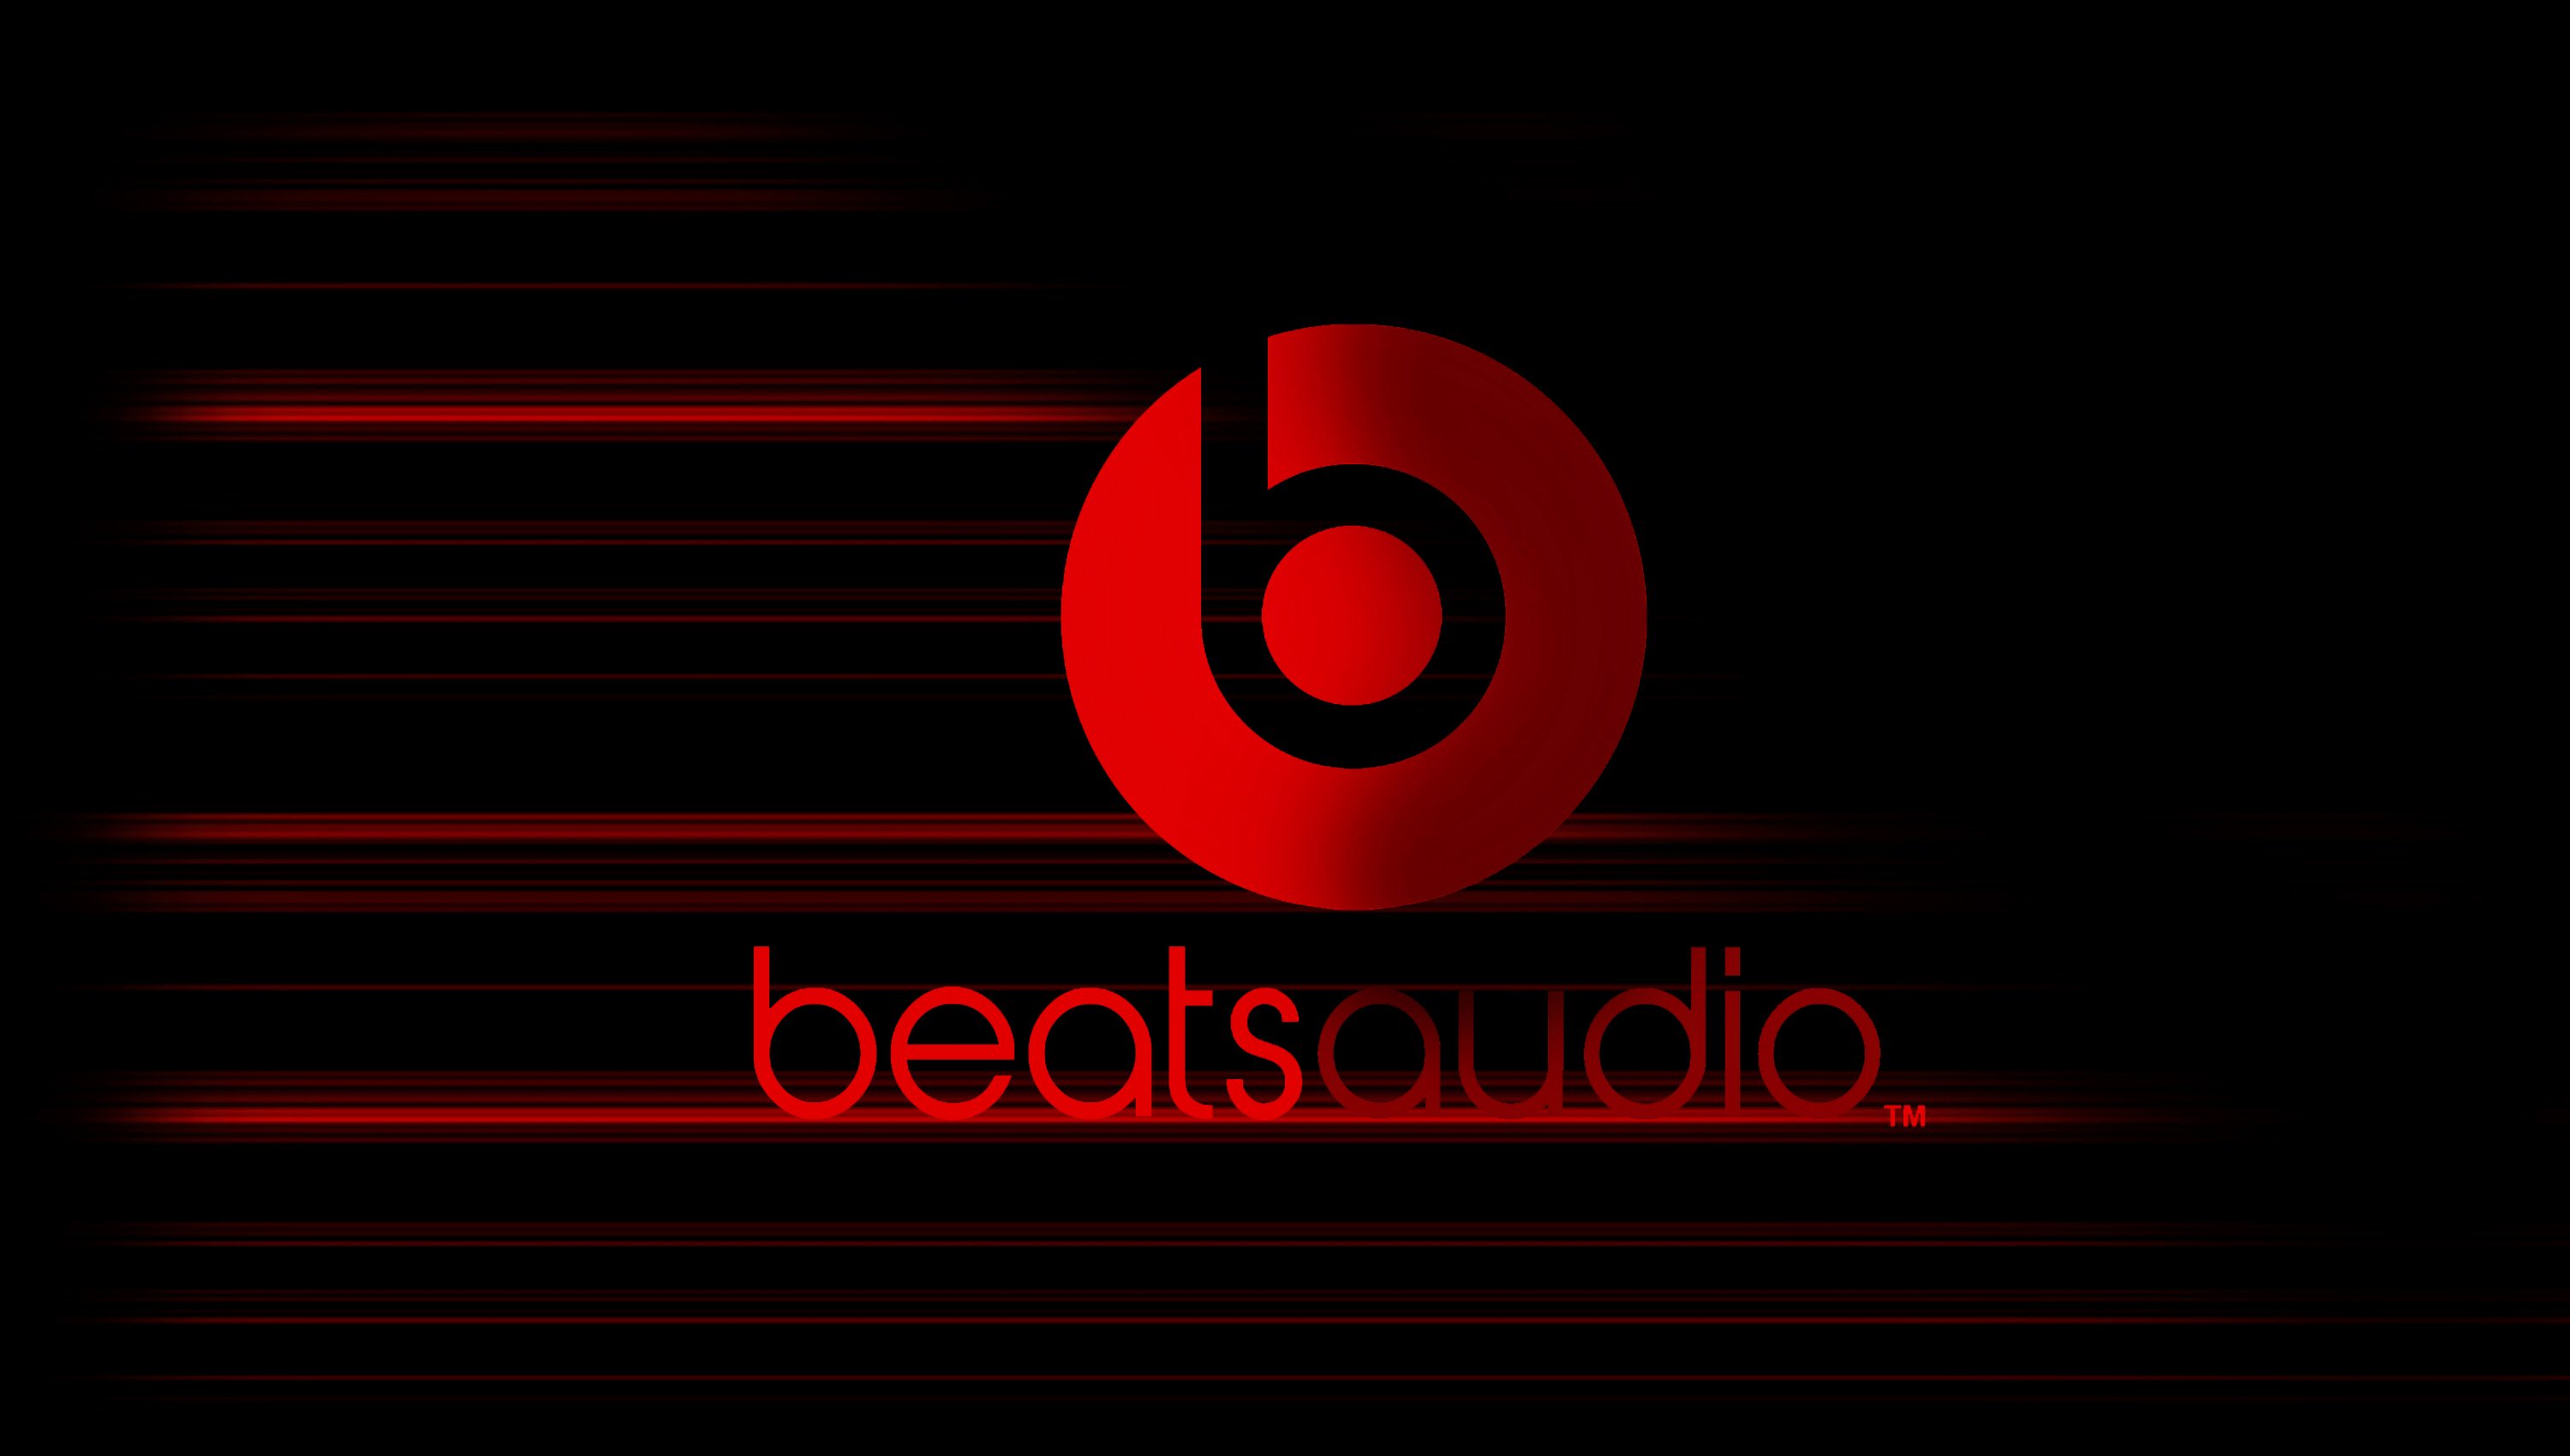 City of Beats instal the new version for mac